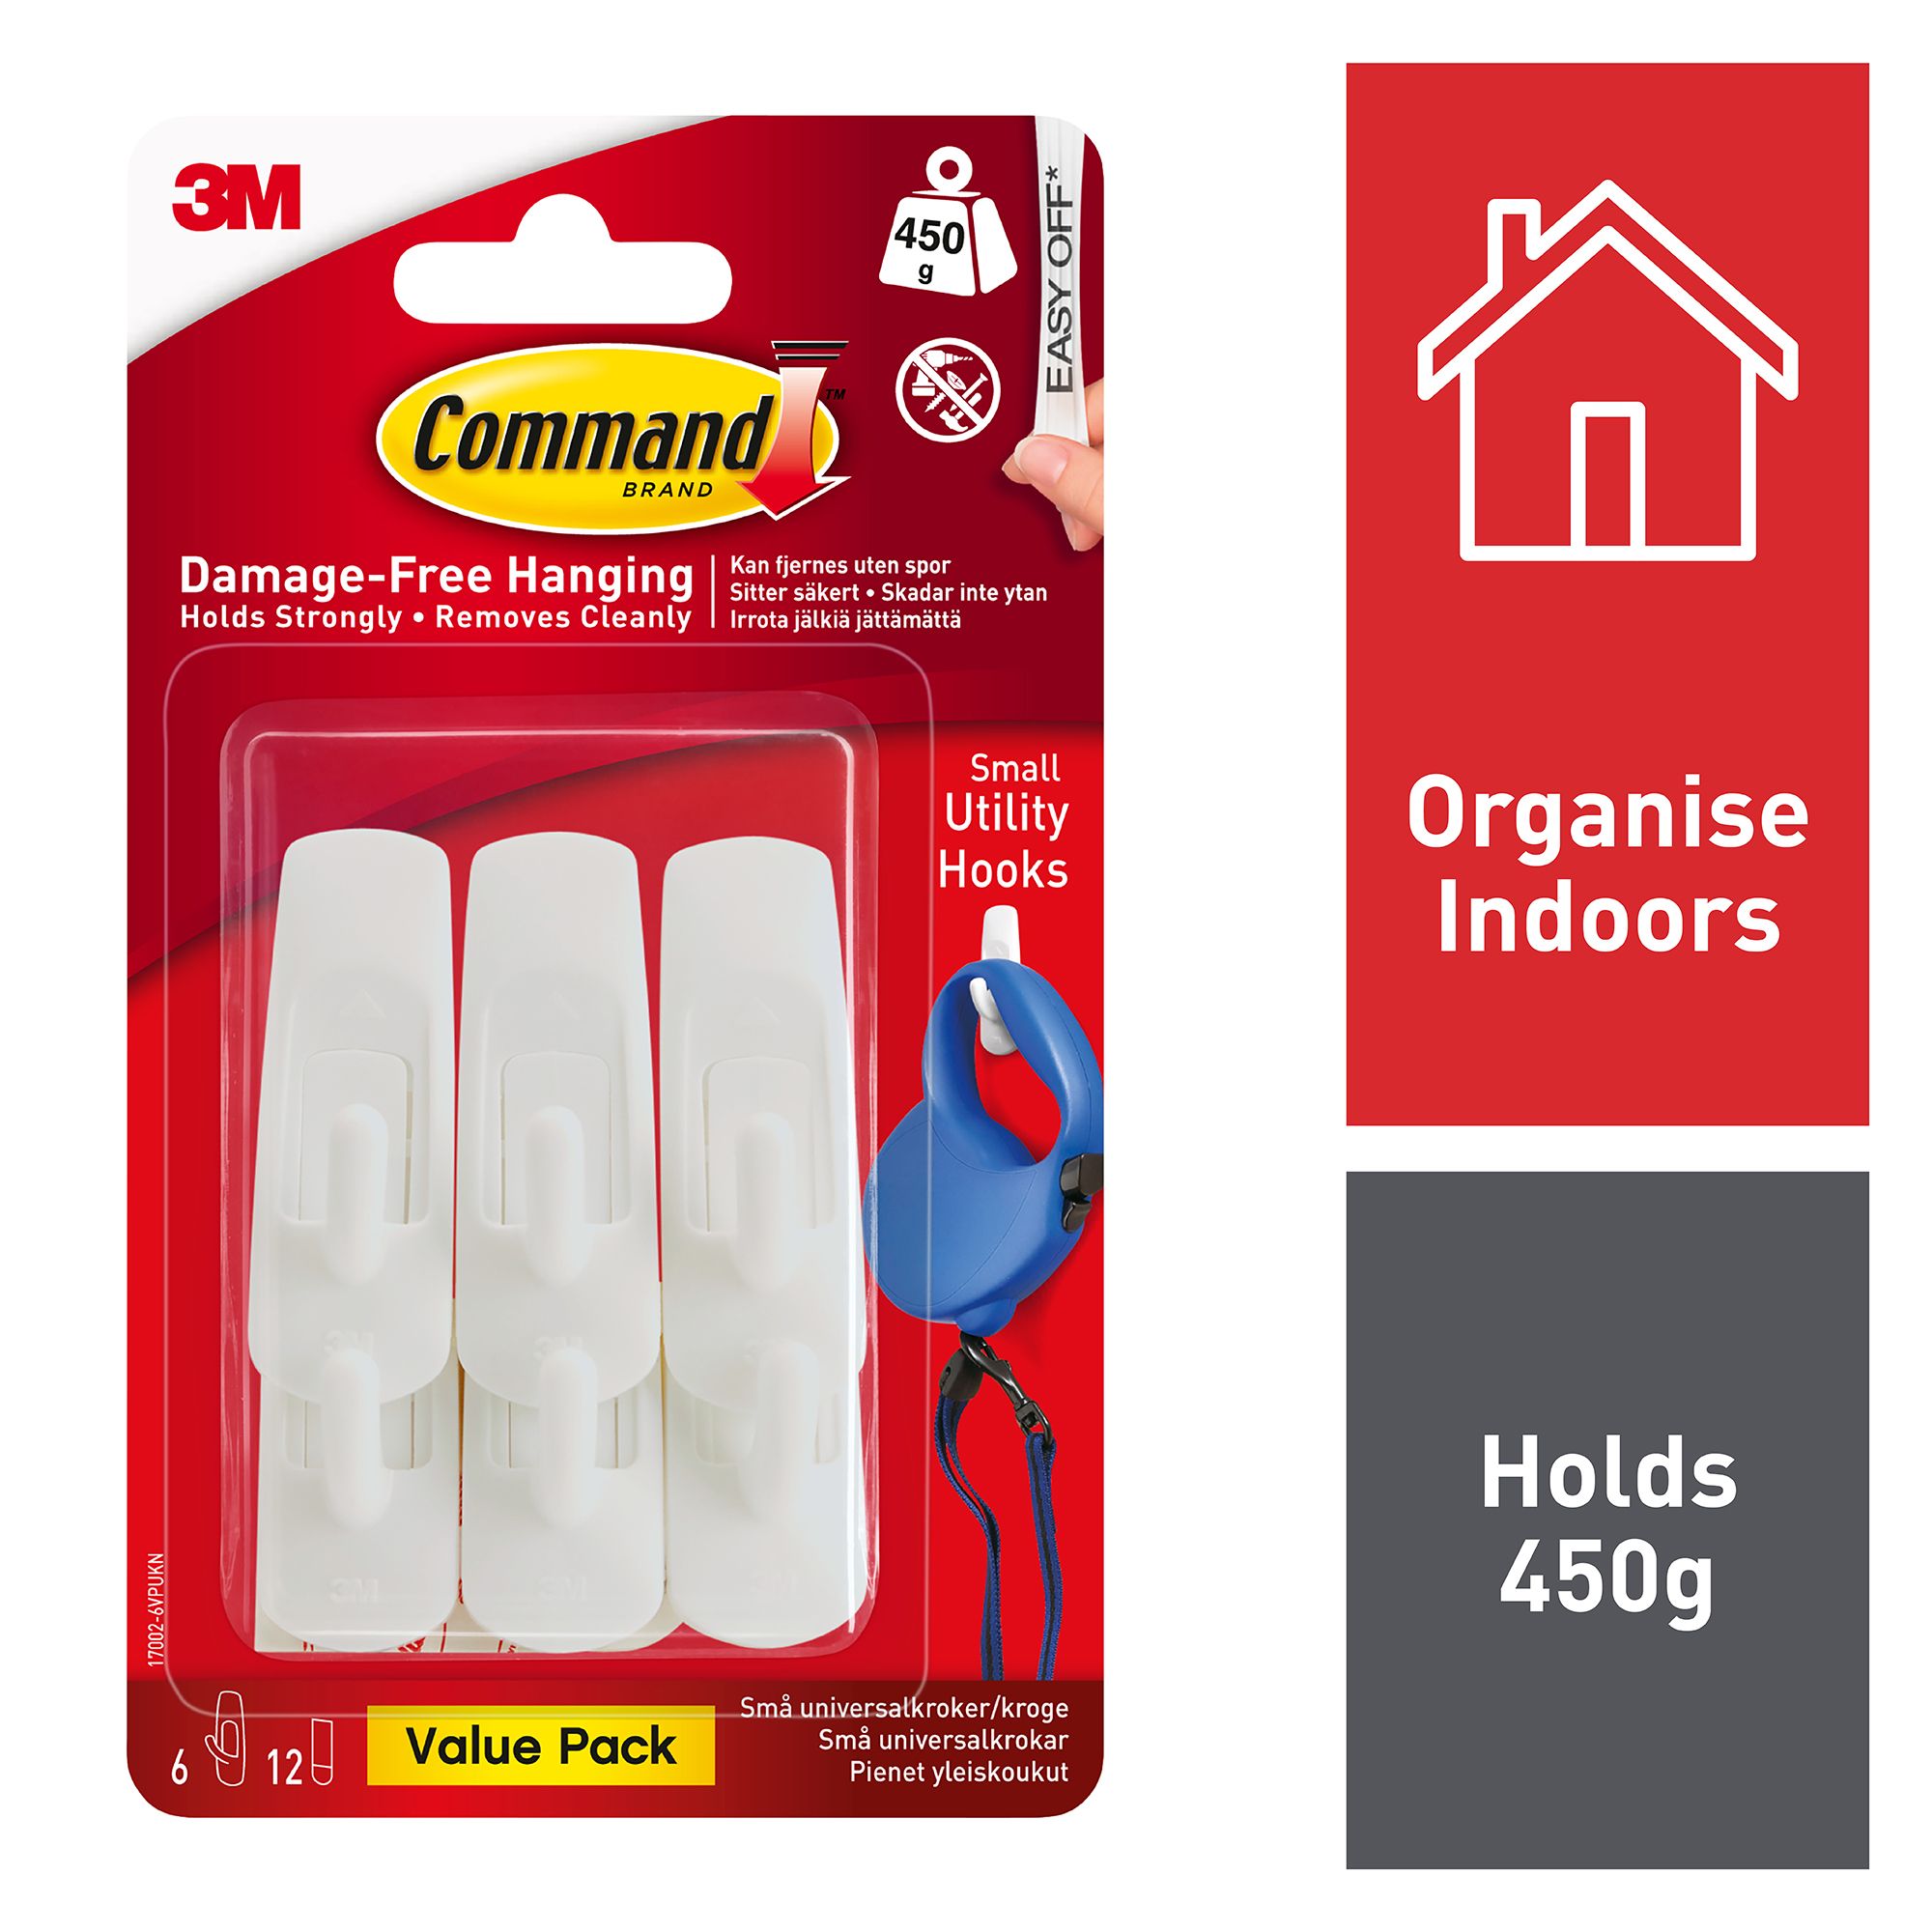 https://media.diy.com/is/image/Kingfisher/3m-command-utility-small-white-adhesive-hook-holds-0-45kg-pack-of-6~0051131949430_02c?$MOB_PREV$&$width=618&$height=618